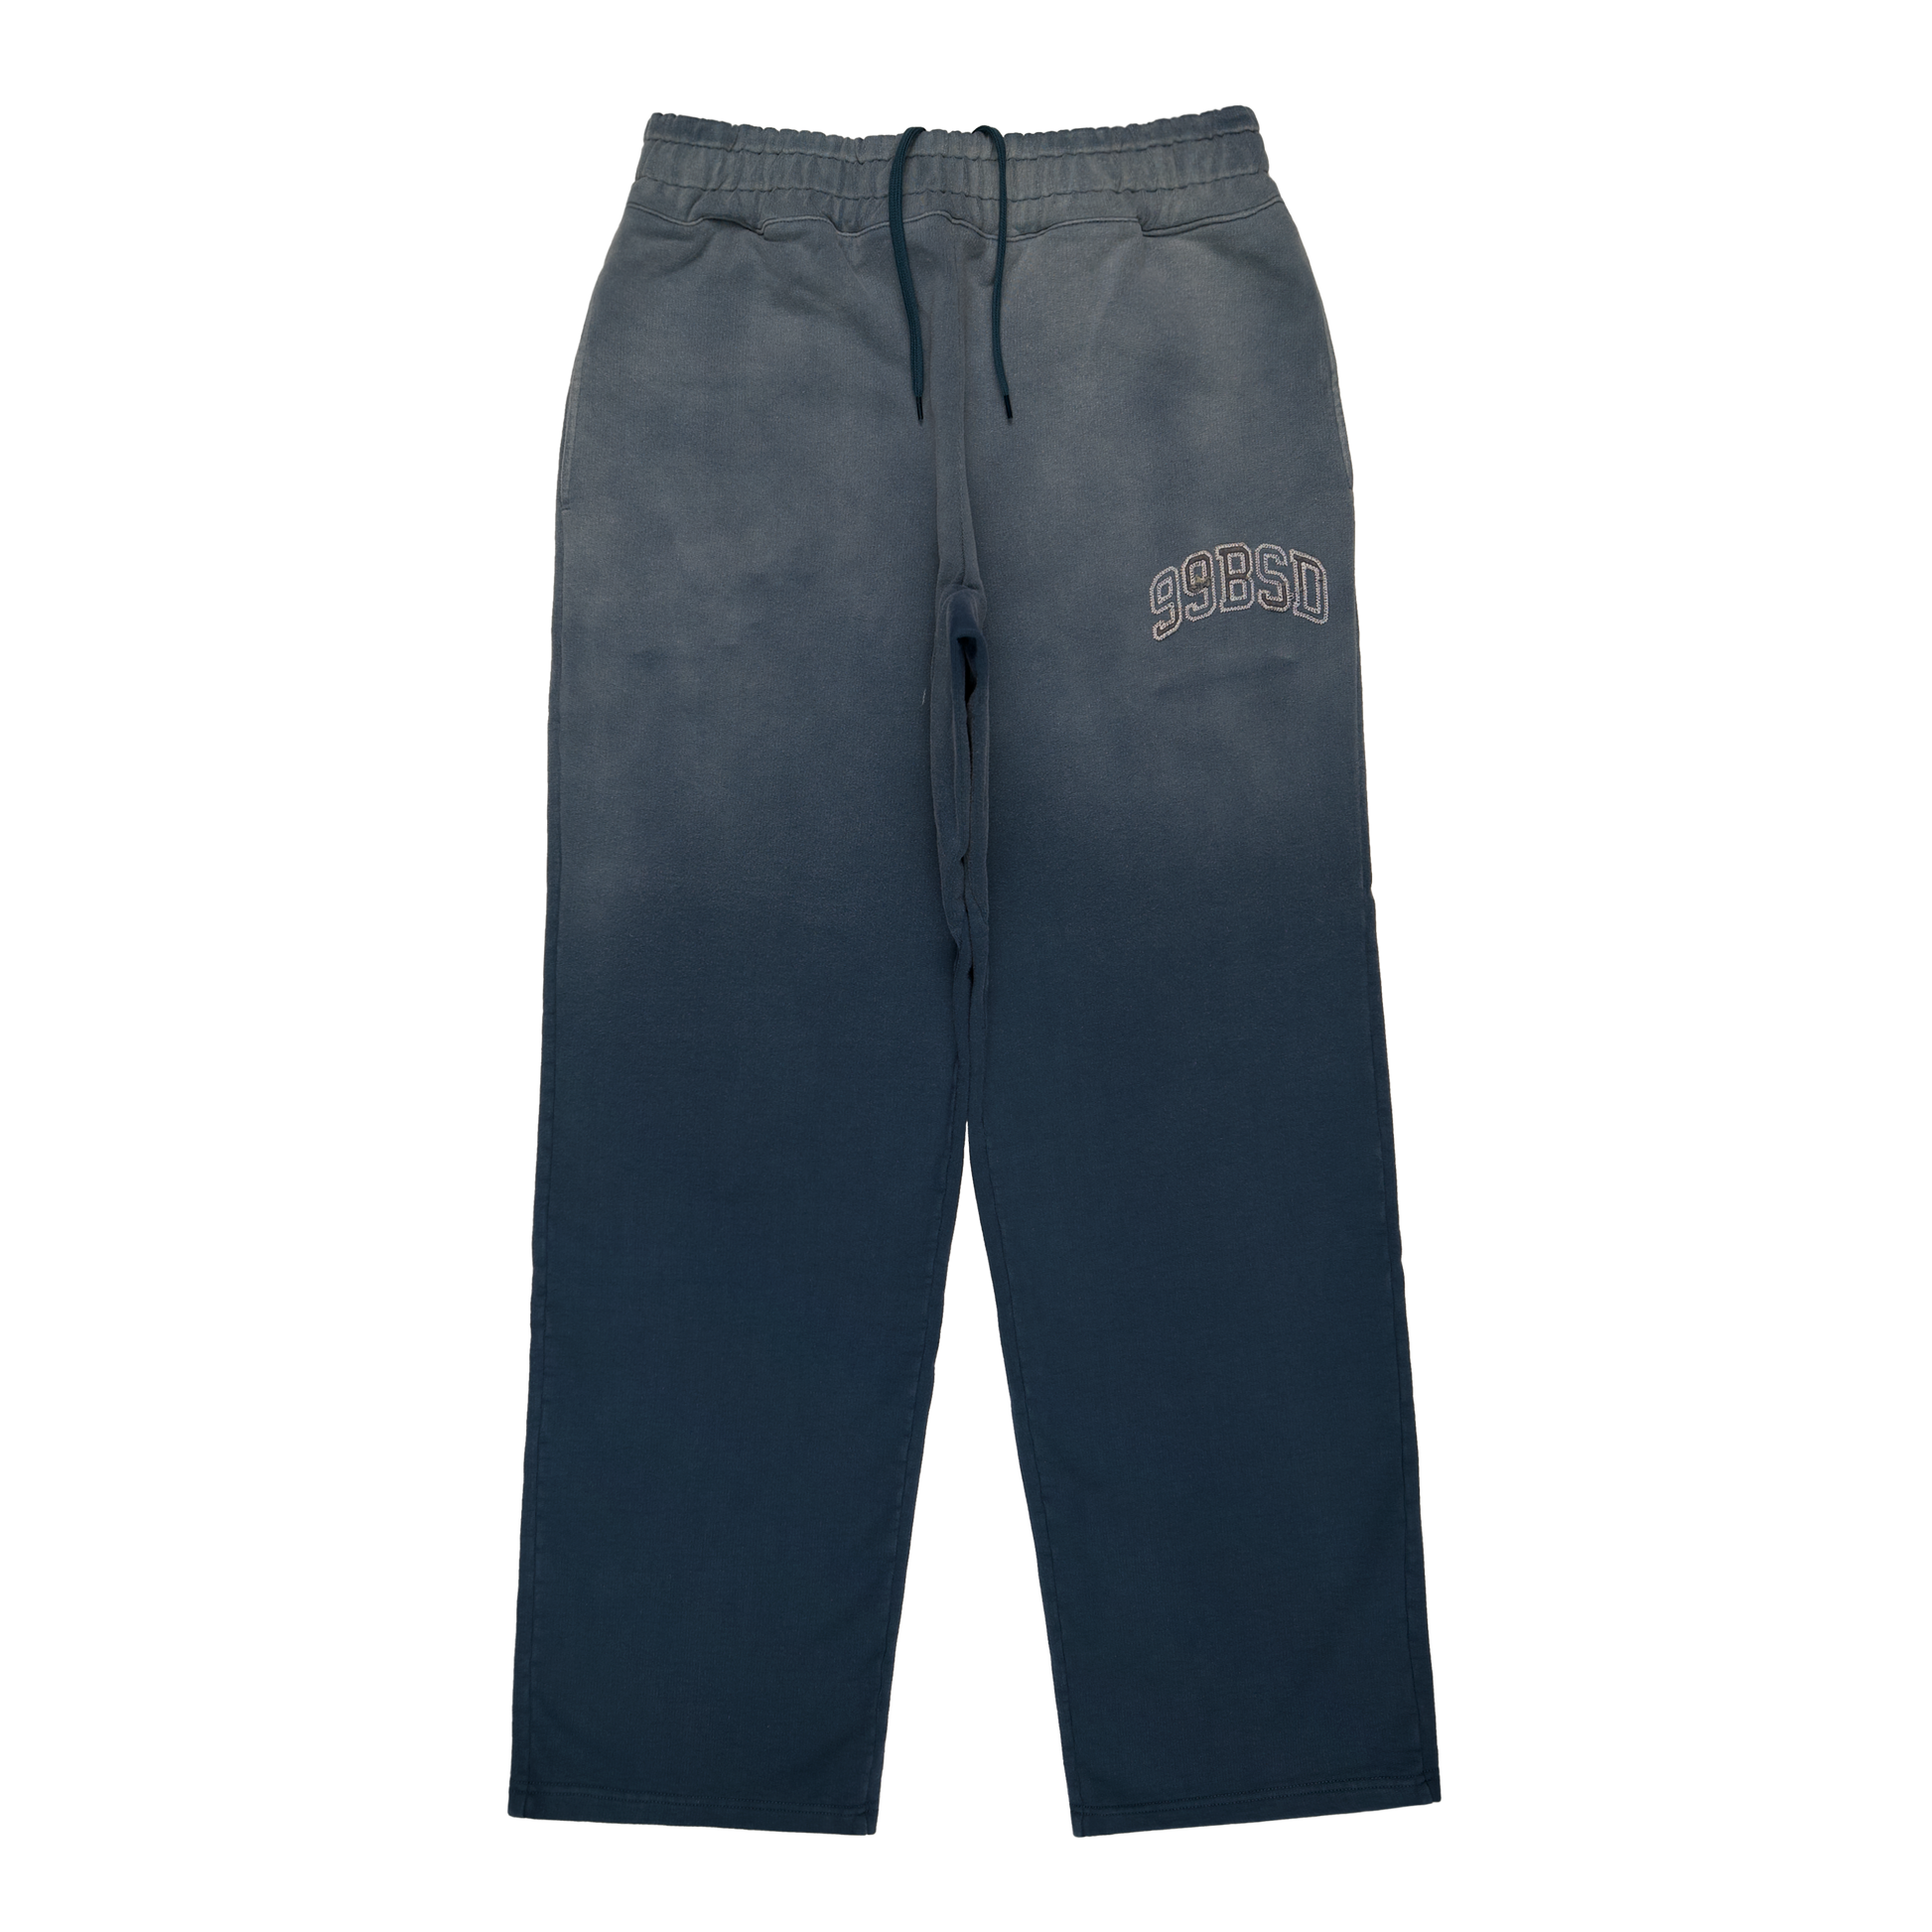 Deconstructed Sweatpants [Faded Blue] – 99Based